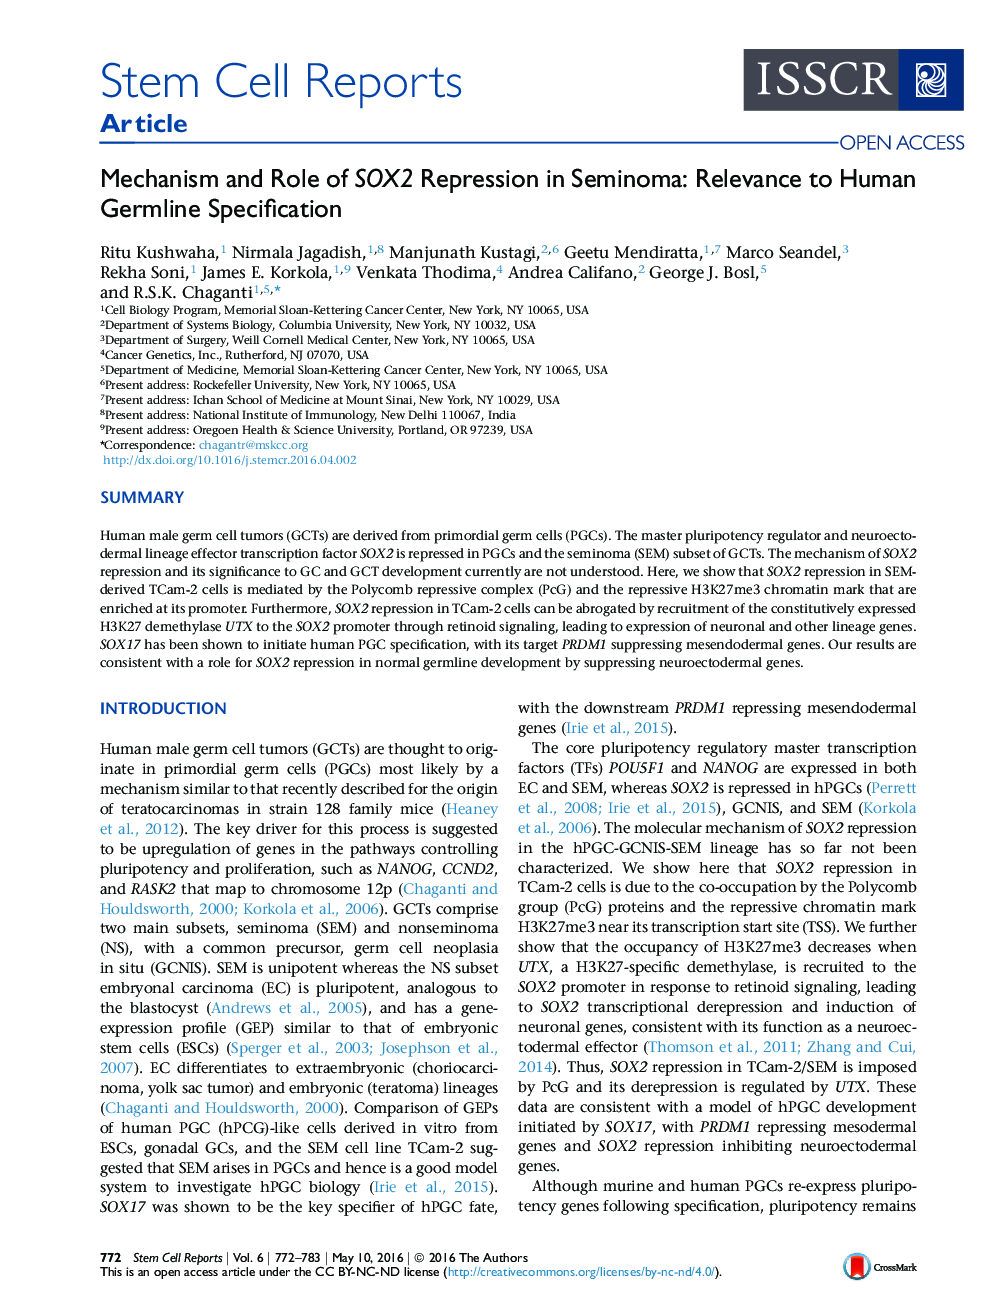 Mechanism and Role of SOX2 Repression in Seminoma: Relevance to Human Germline Specification